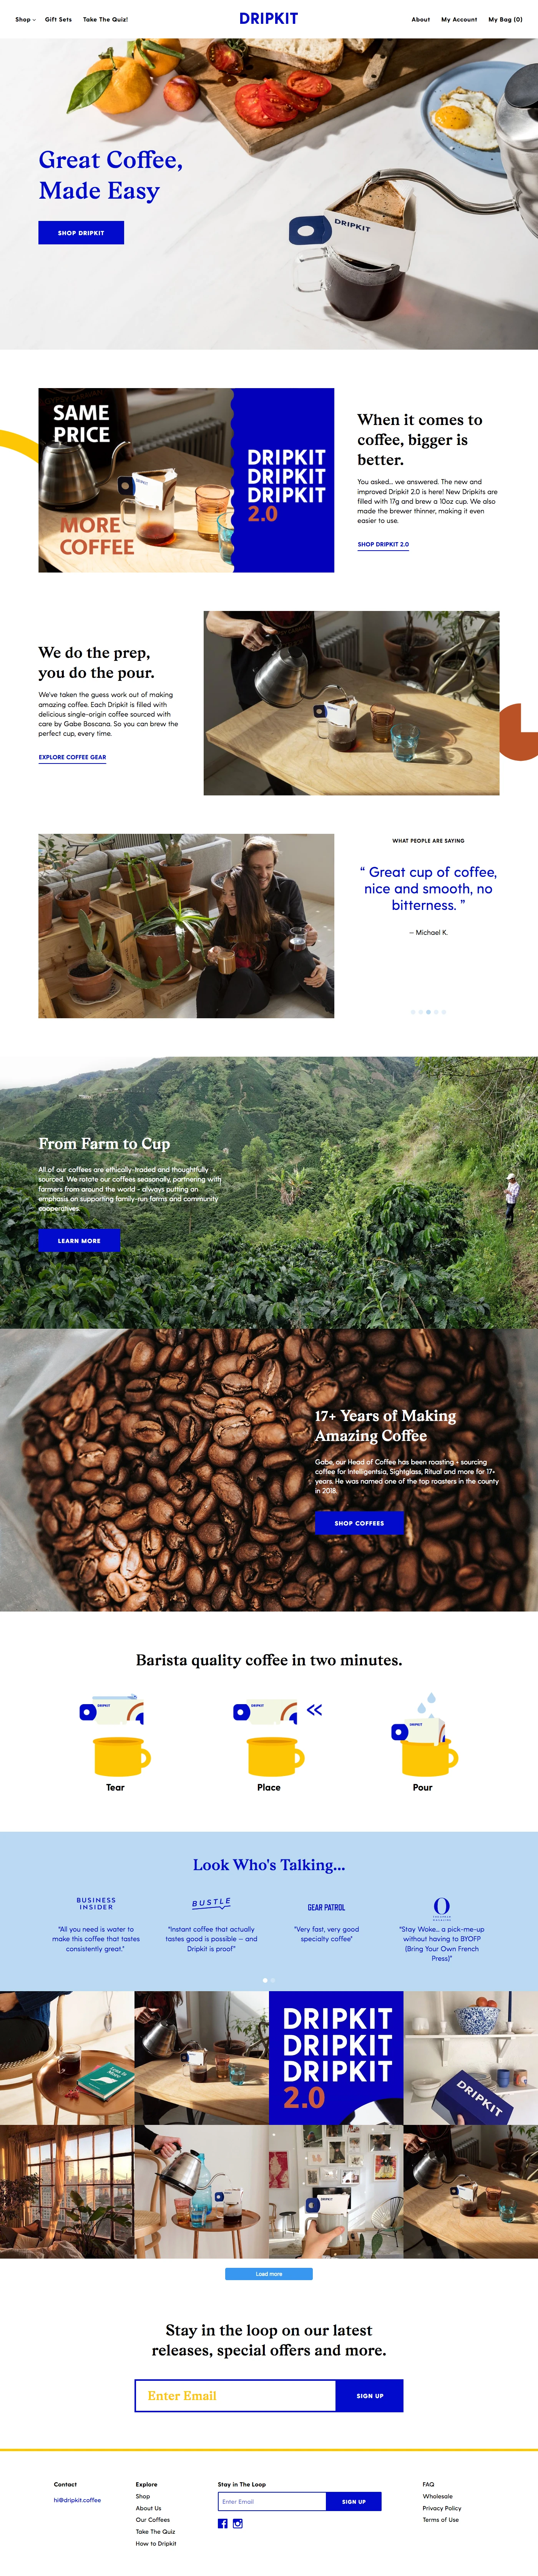 Dripkit Landing Page Example: Barista quality pour over has never been easier! Get delicious and ready-to-brew coffee packs delivered to straight to your door.